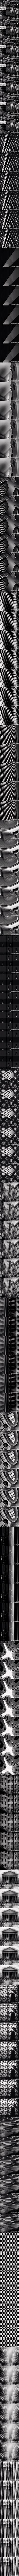 Achromatic World collection image